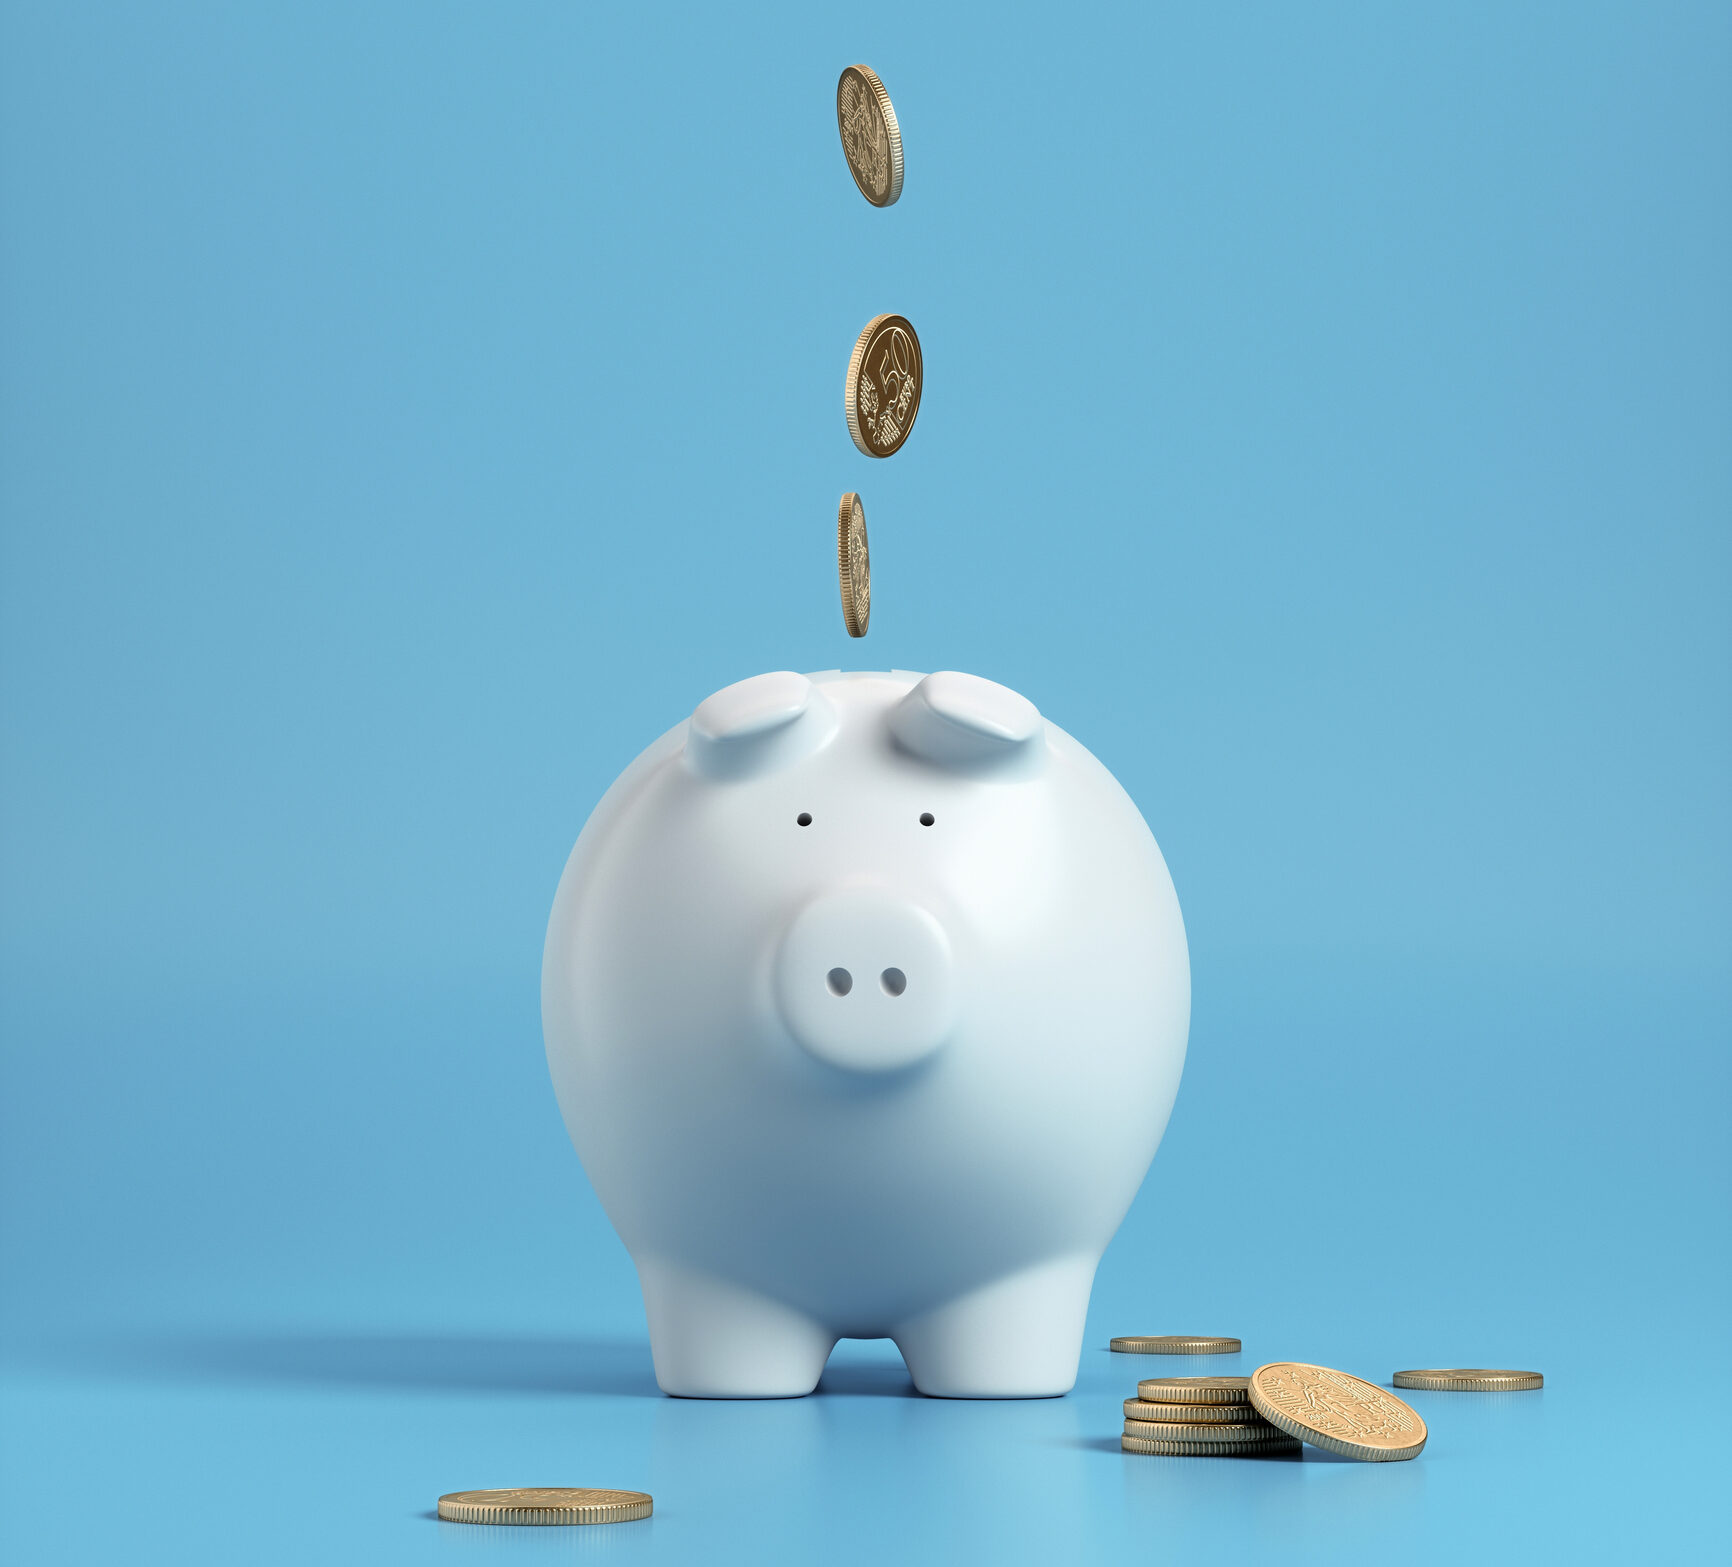 Falling coins in to a white piggy bank, Finance concepts